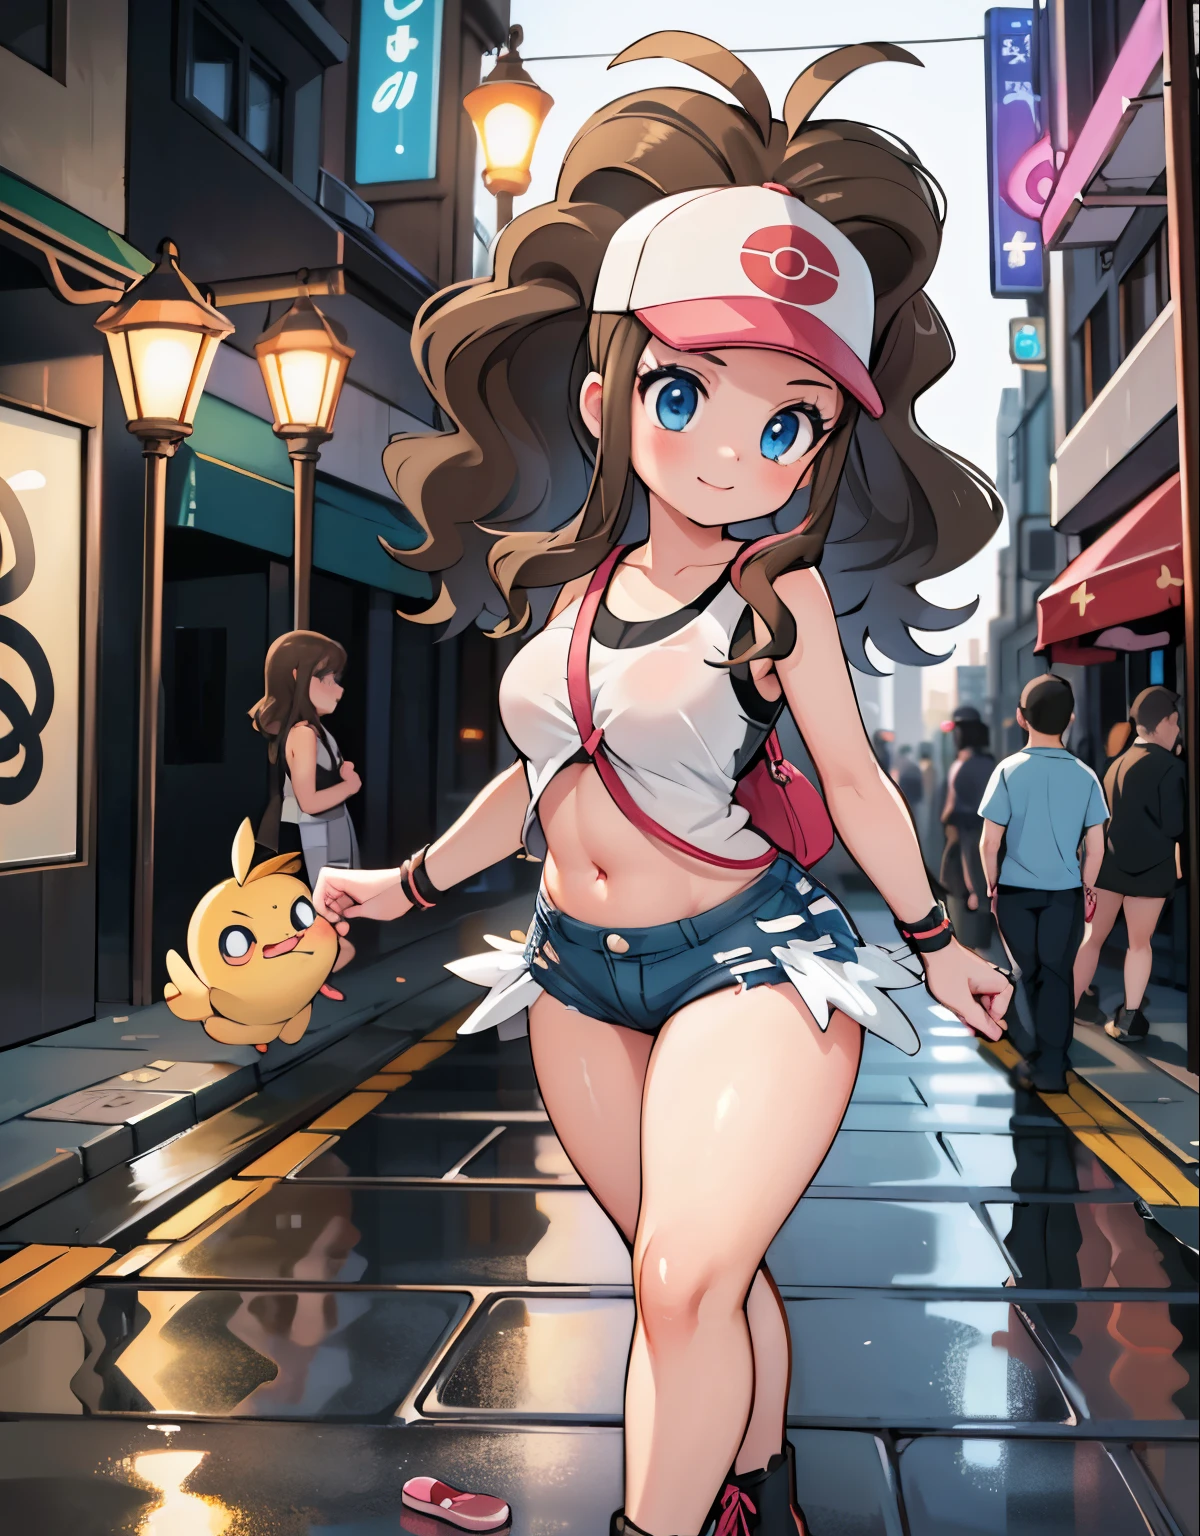 (best quality, highres, masterpiece:1.2), ultra-detailed, realistic:1.37, sketches, hilda pokemon, def1, curvy girl, legs together, curvy, visible thighs, chubby thighs, thighs in the foreground, fishnet, fishnets, pantyhose fishnet, body shape, walking, holding a cellphone, Alone in the alley， Neon lights in the alley， Very reflective city, dirty place, beer bottles, trash on the floor, graffiti on the wall, watched by a crowd of men, they observe her body, vibrant colors, nervous look, fearful, afraid, timorous smile, looking_at_viewer, bis ass, wide hips, hero view, she tries to hide her thighs with her hands